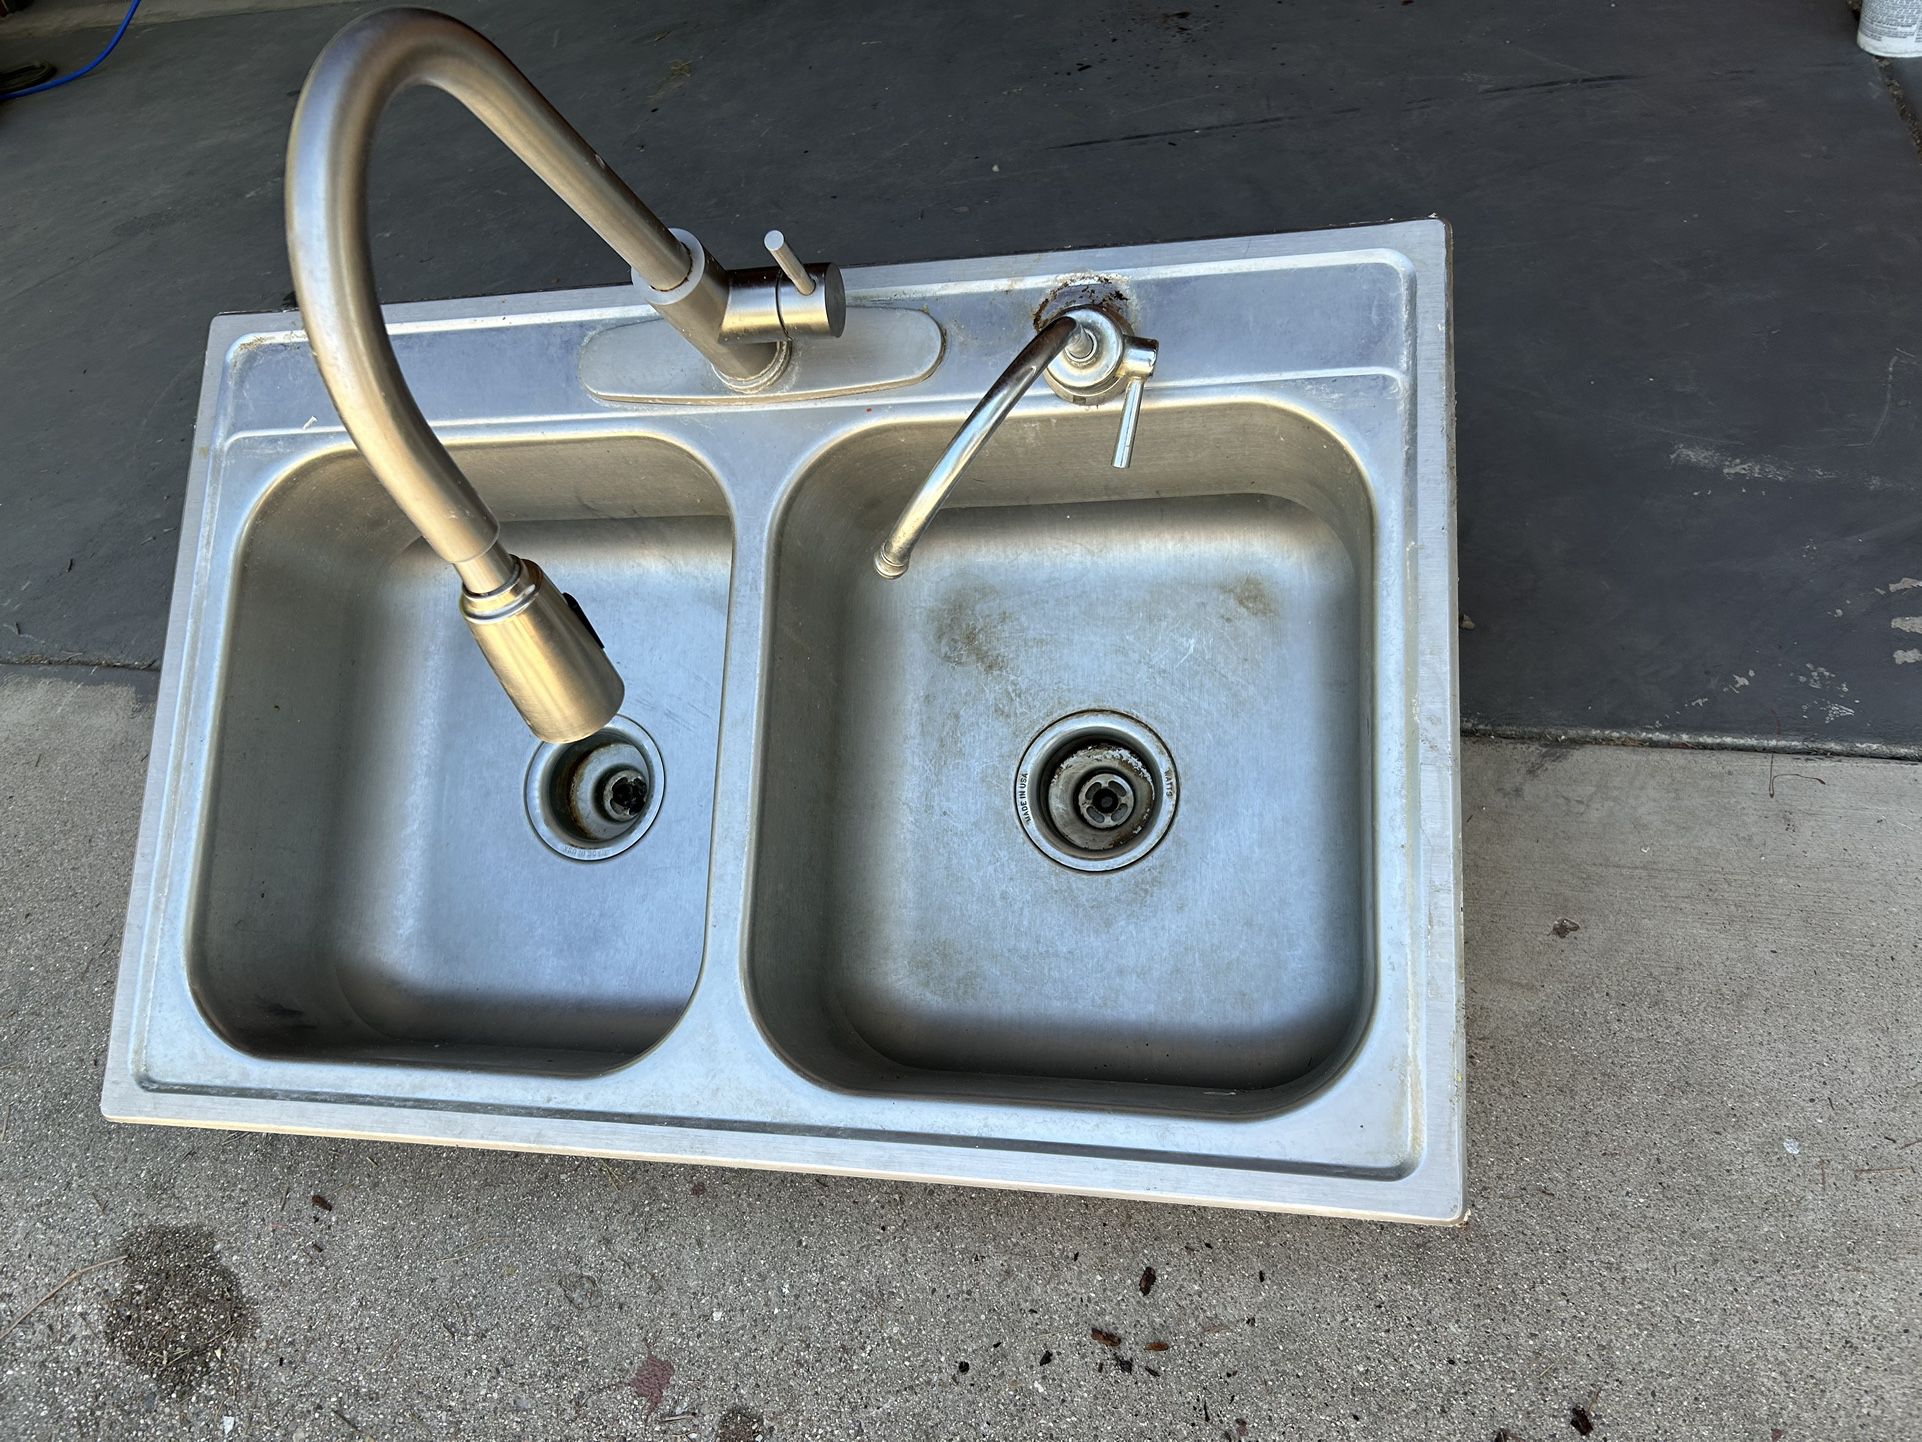 Kitchen Sink With Faucet